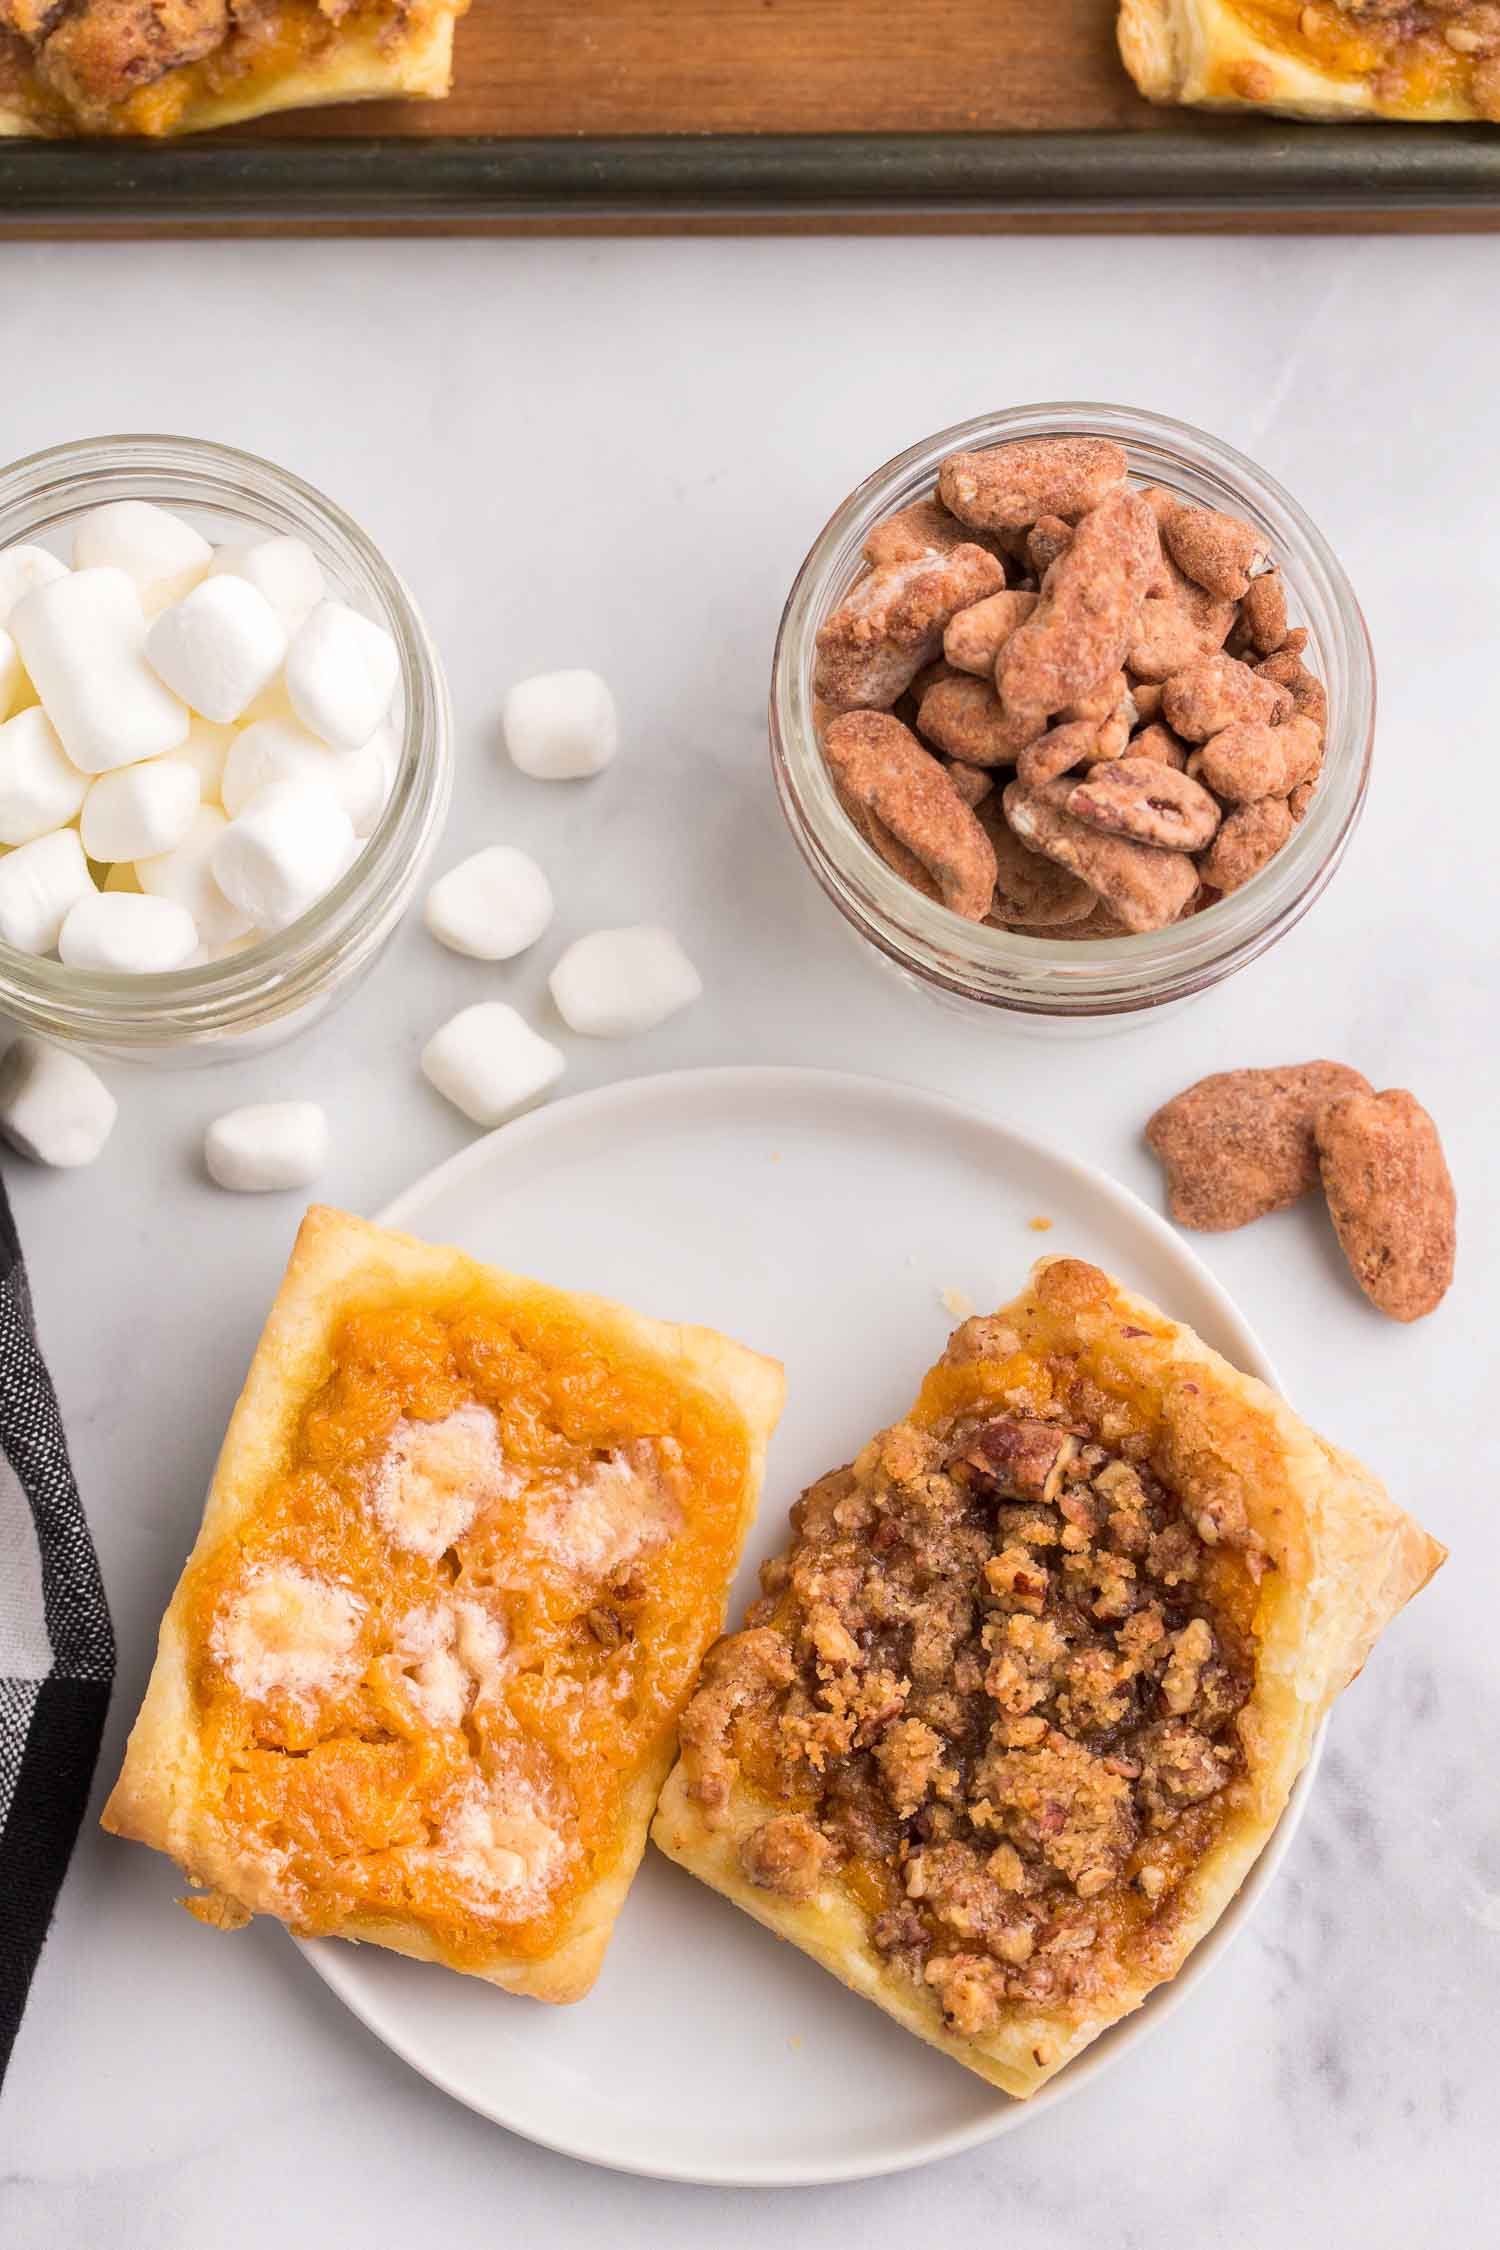 Two pieces of sweet potato pastry on a white plate with two cups of marshmallows and pecans and a plate filled with pastry behind it.